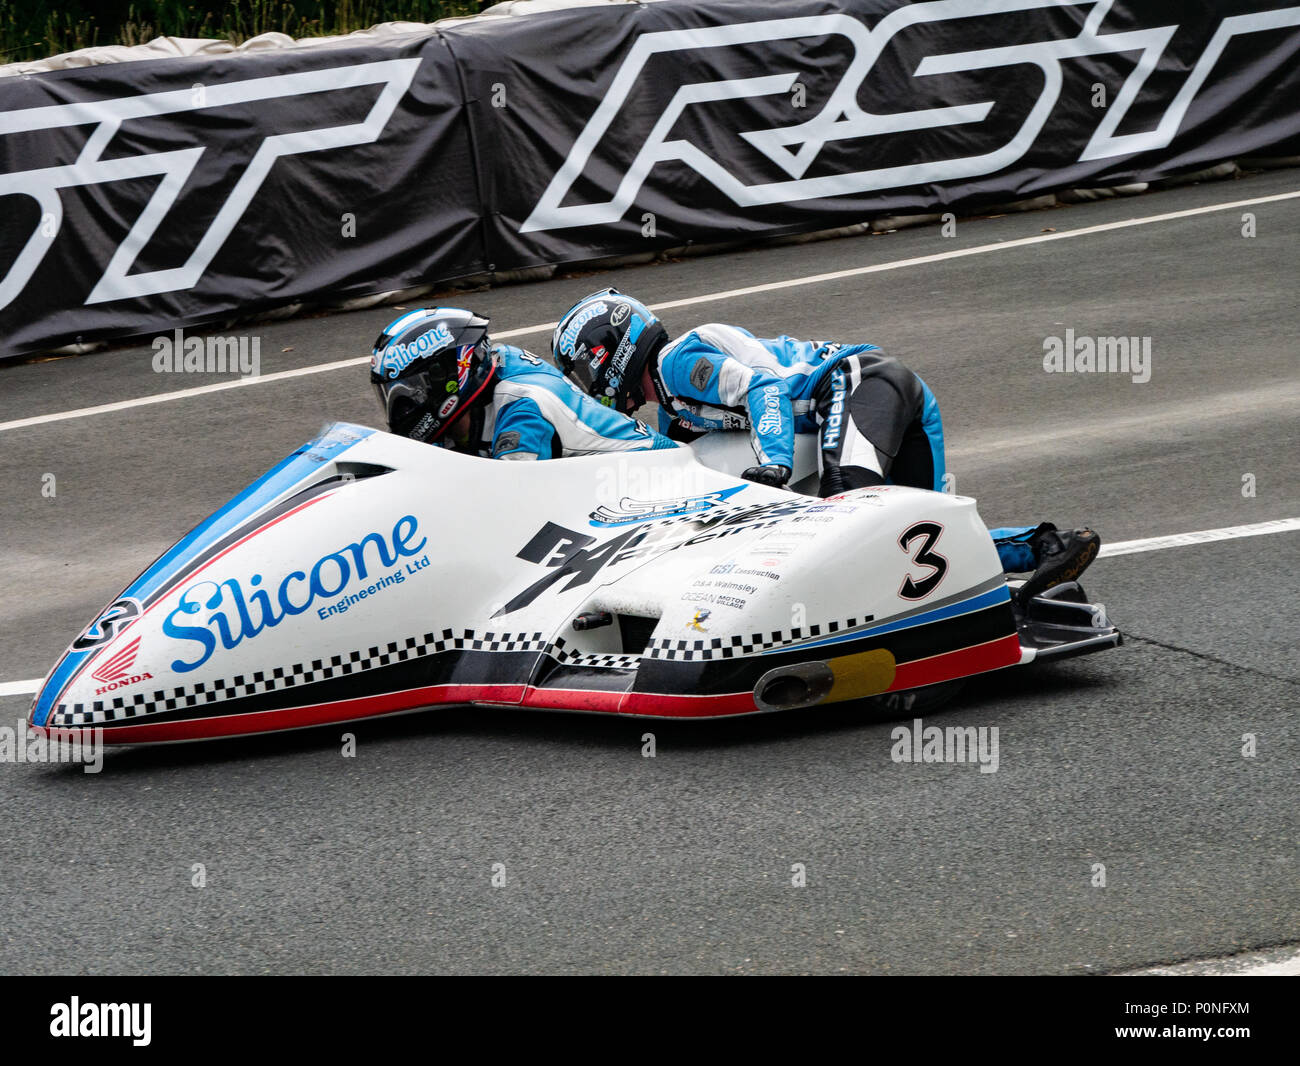 Number 3, John Holden / Lee Cain, sidecar rider and passenger, Isle of Man TT 2018. Tourist Trophy road race, mountain course Stock Photo